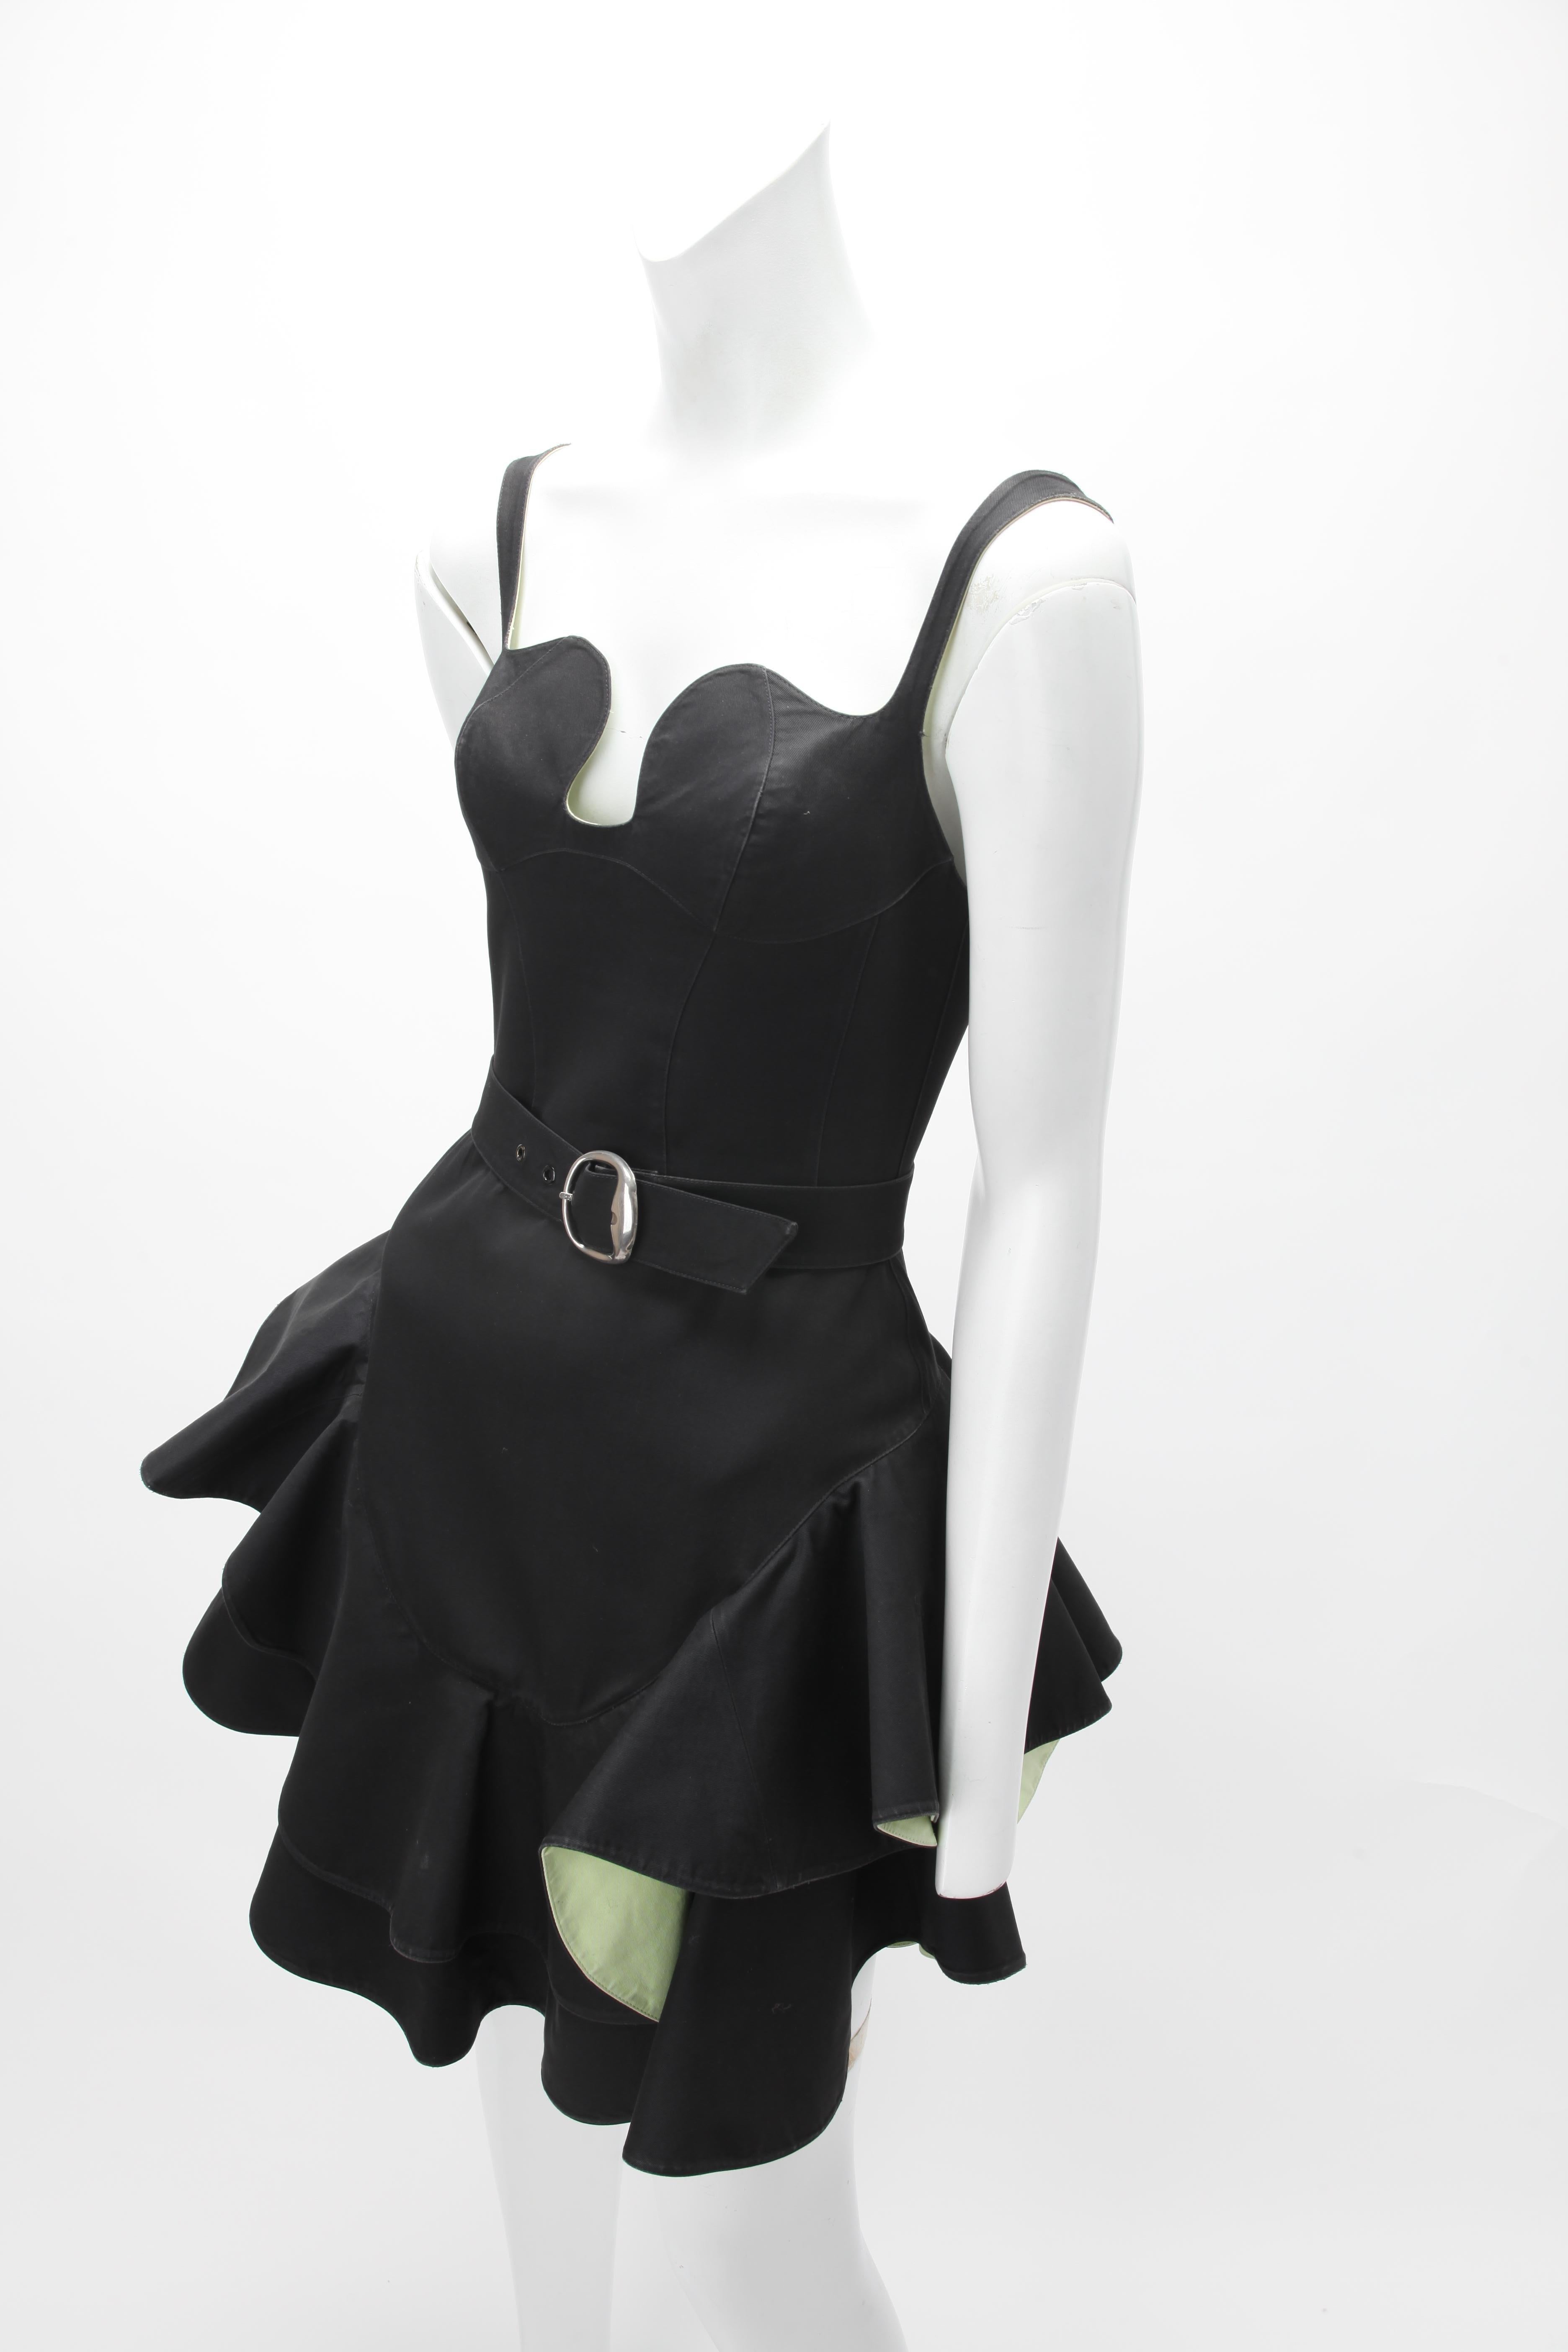 S/S 1990 Thierry Mugler Black and Green Sculptural Dress  In Good Condition For Sale In New York, NY